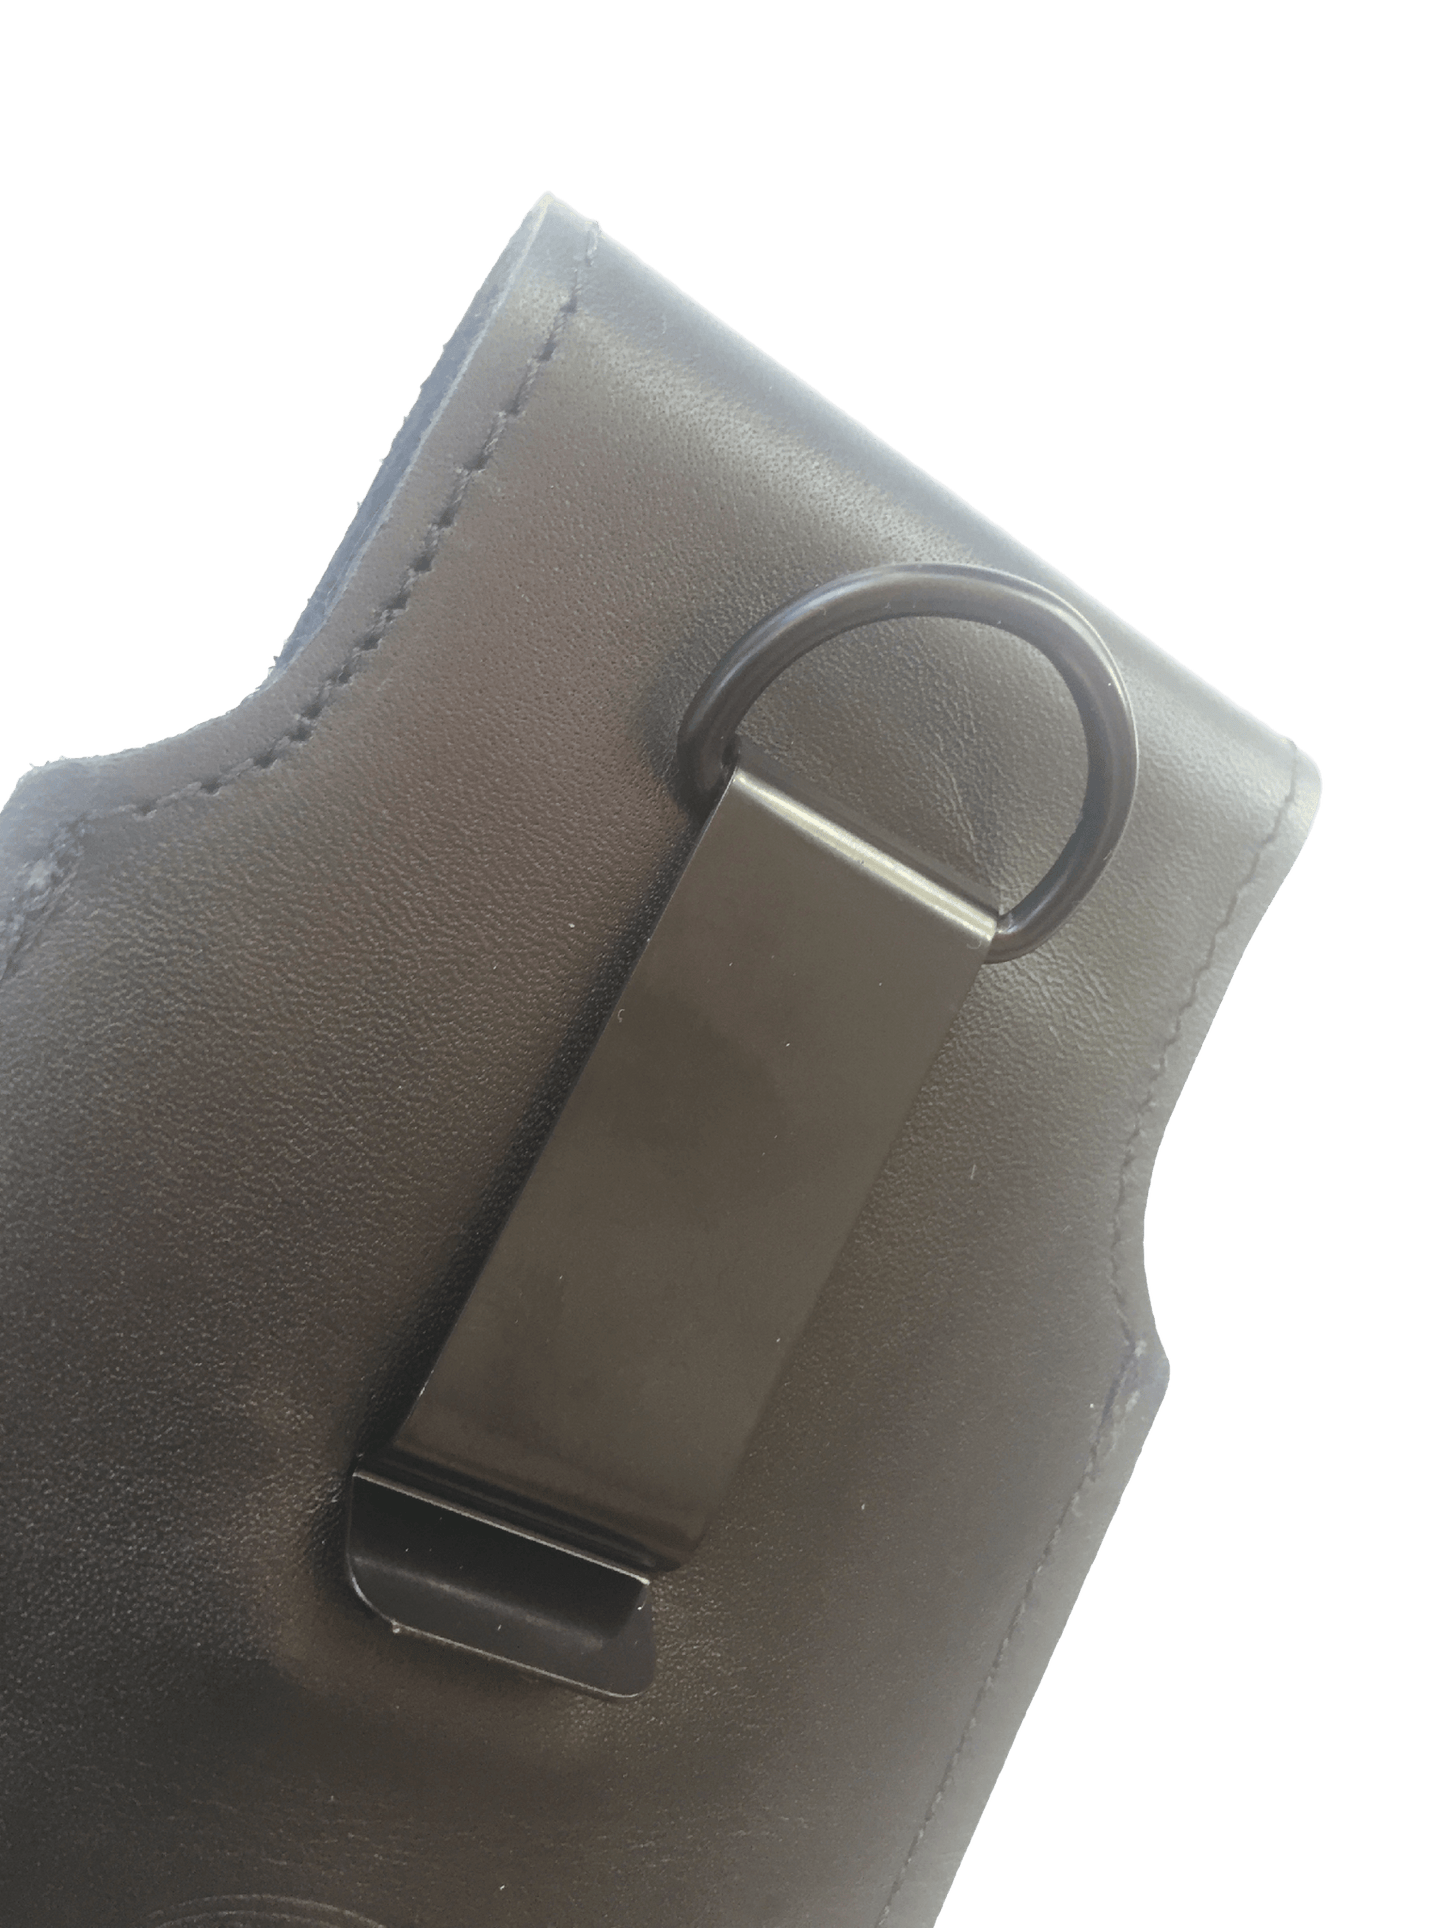 Huawei Mate 20 Pro Smartphone Holster- Ultimate Smartphone Security